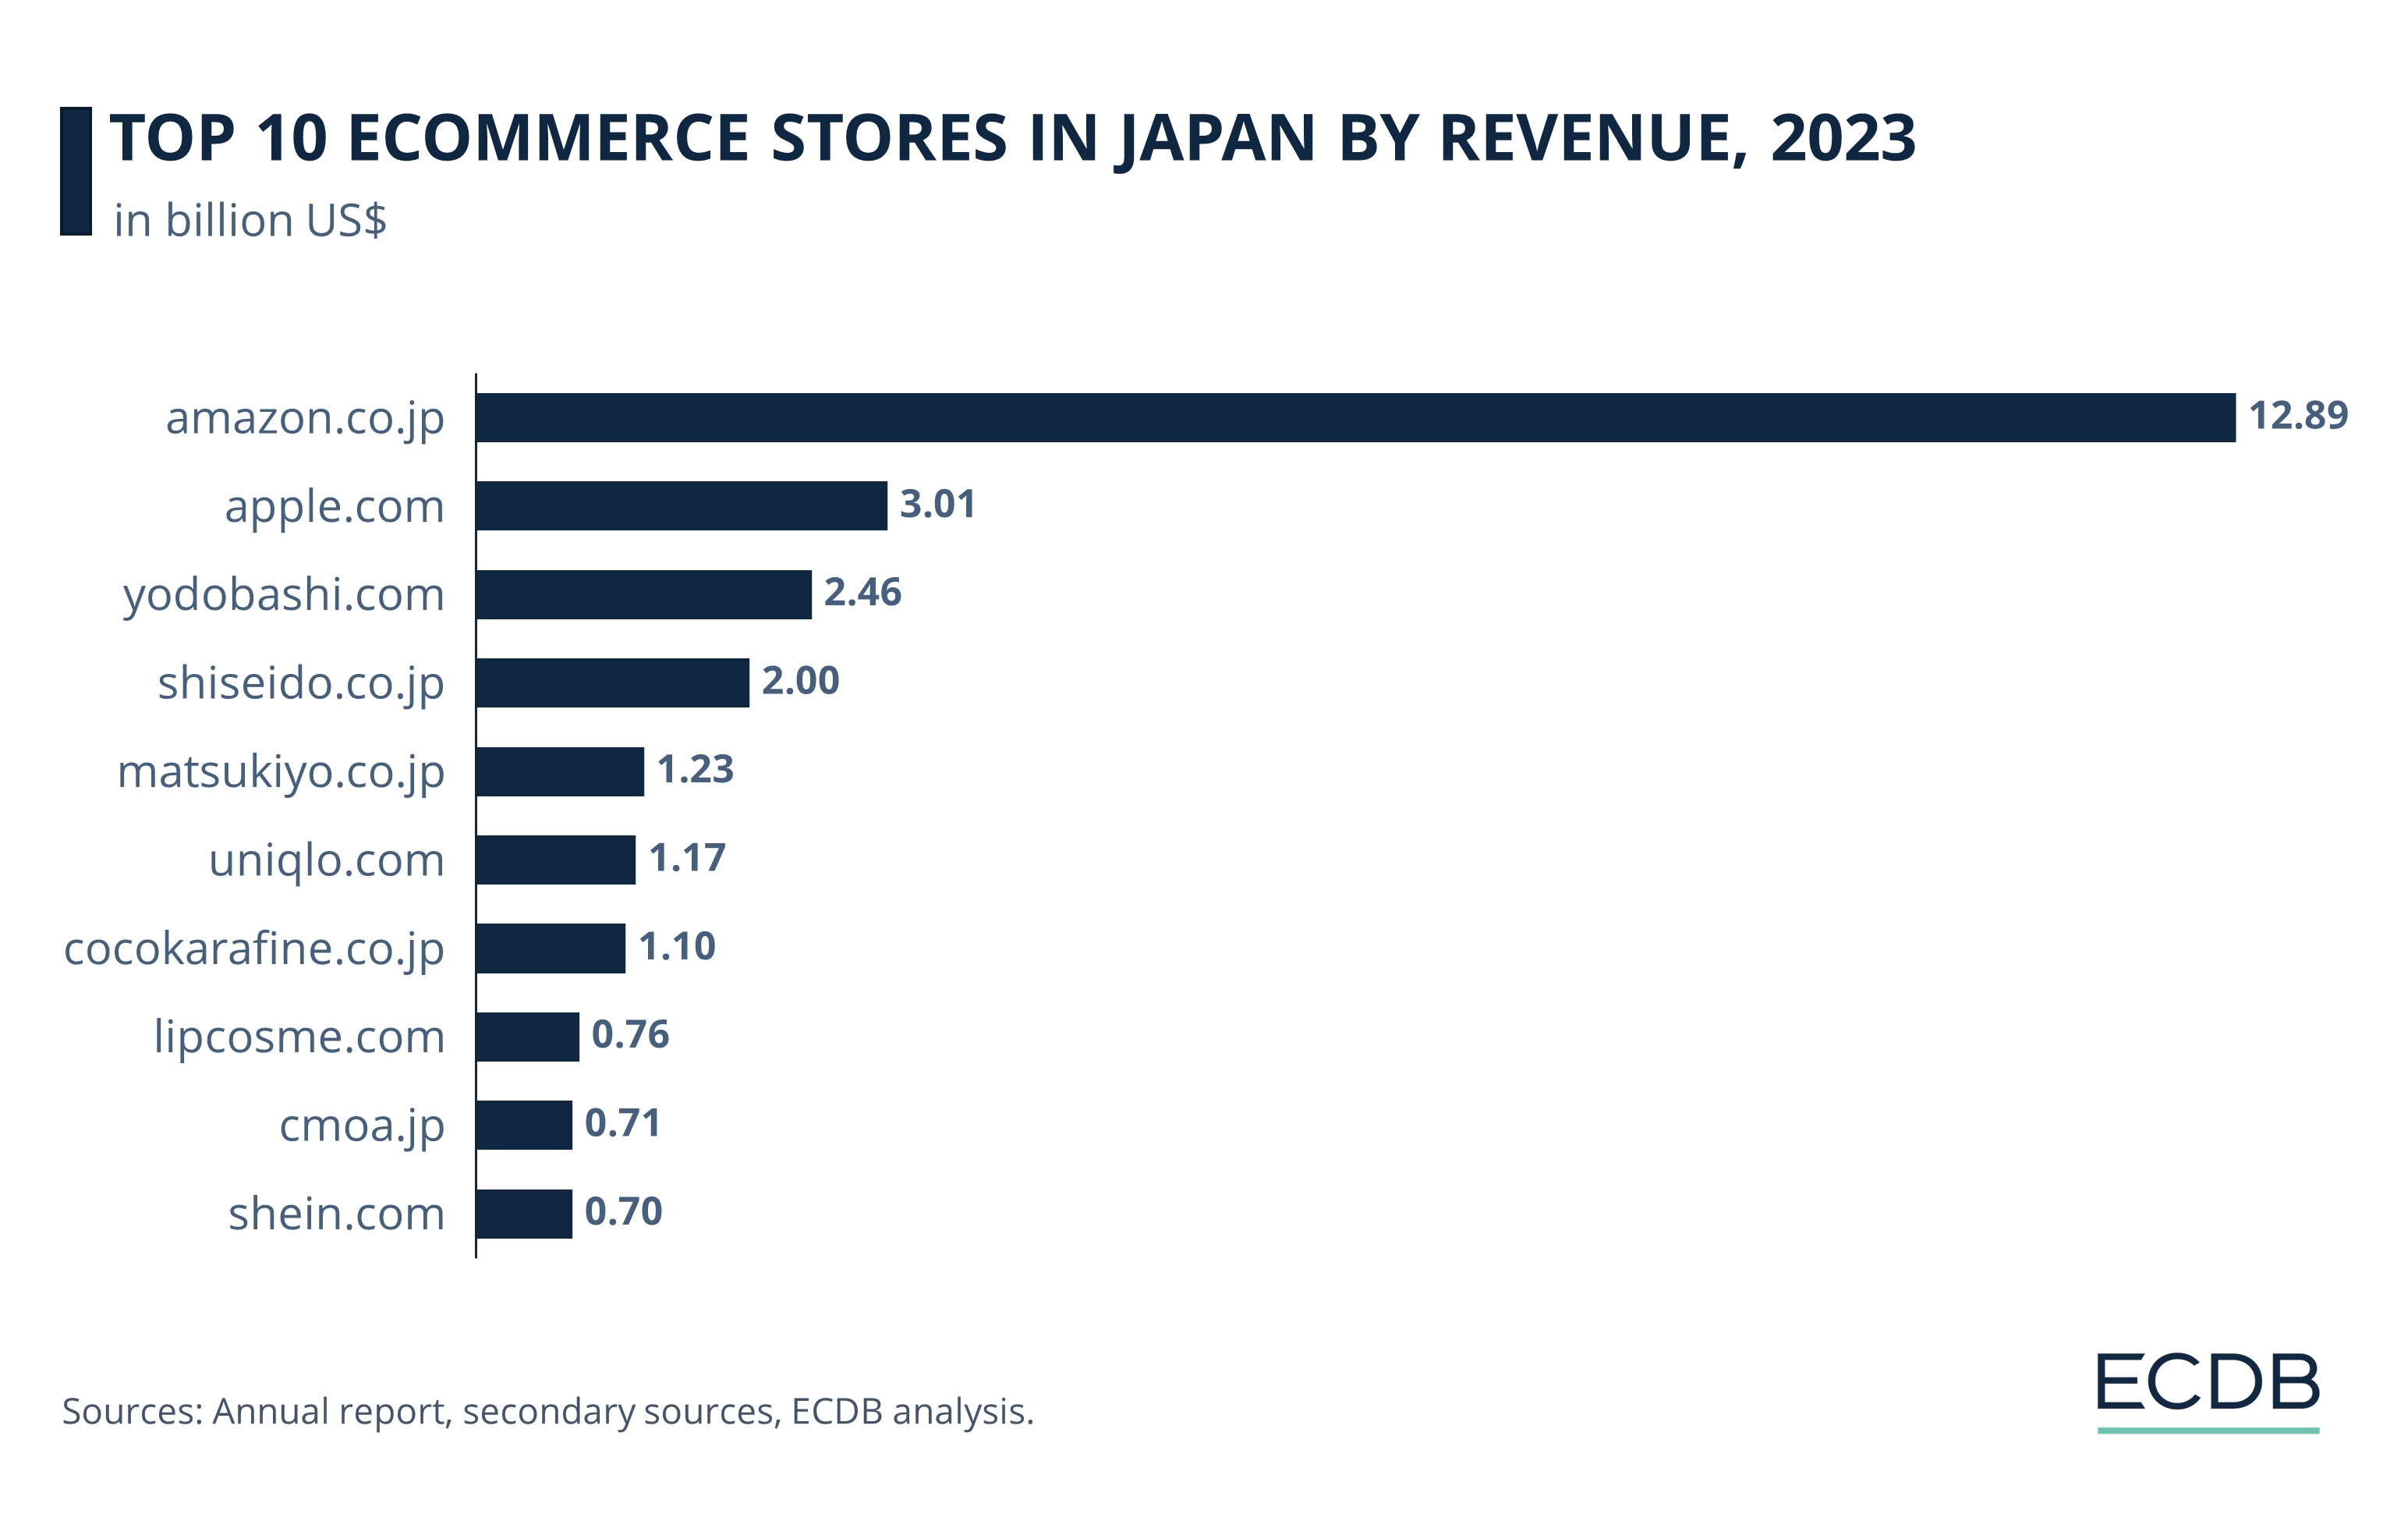 Top 10 eCommerce Stores in Japan by Revenue, 2023